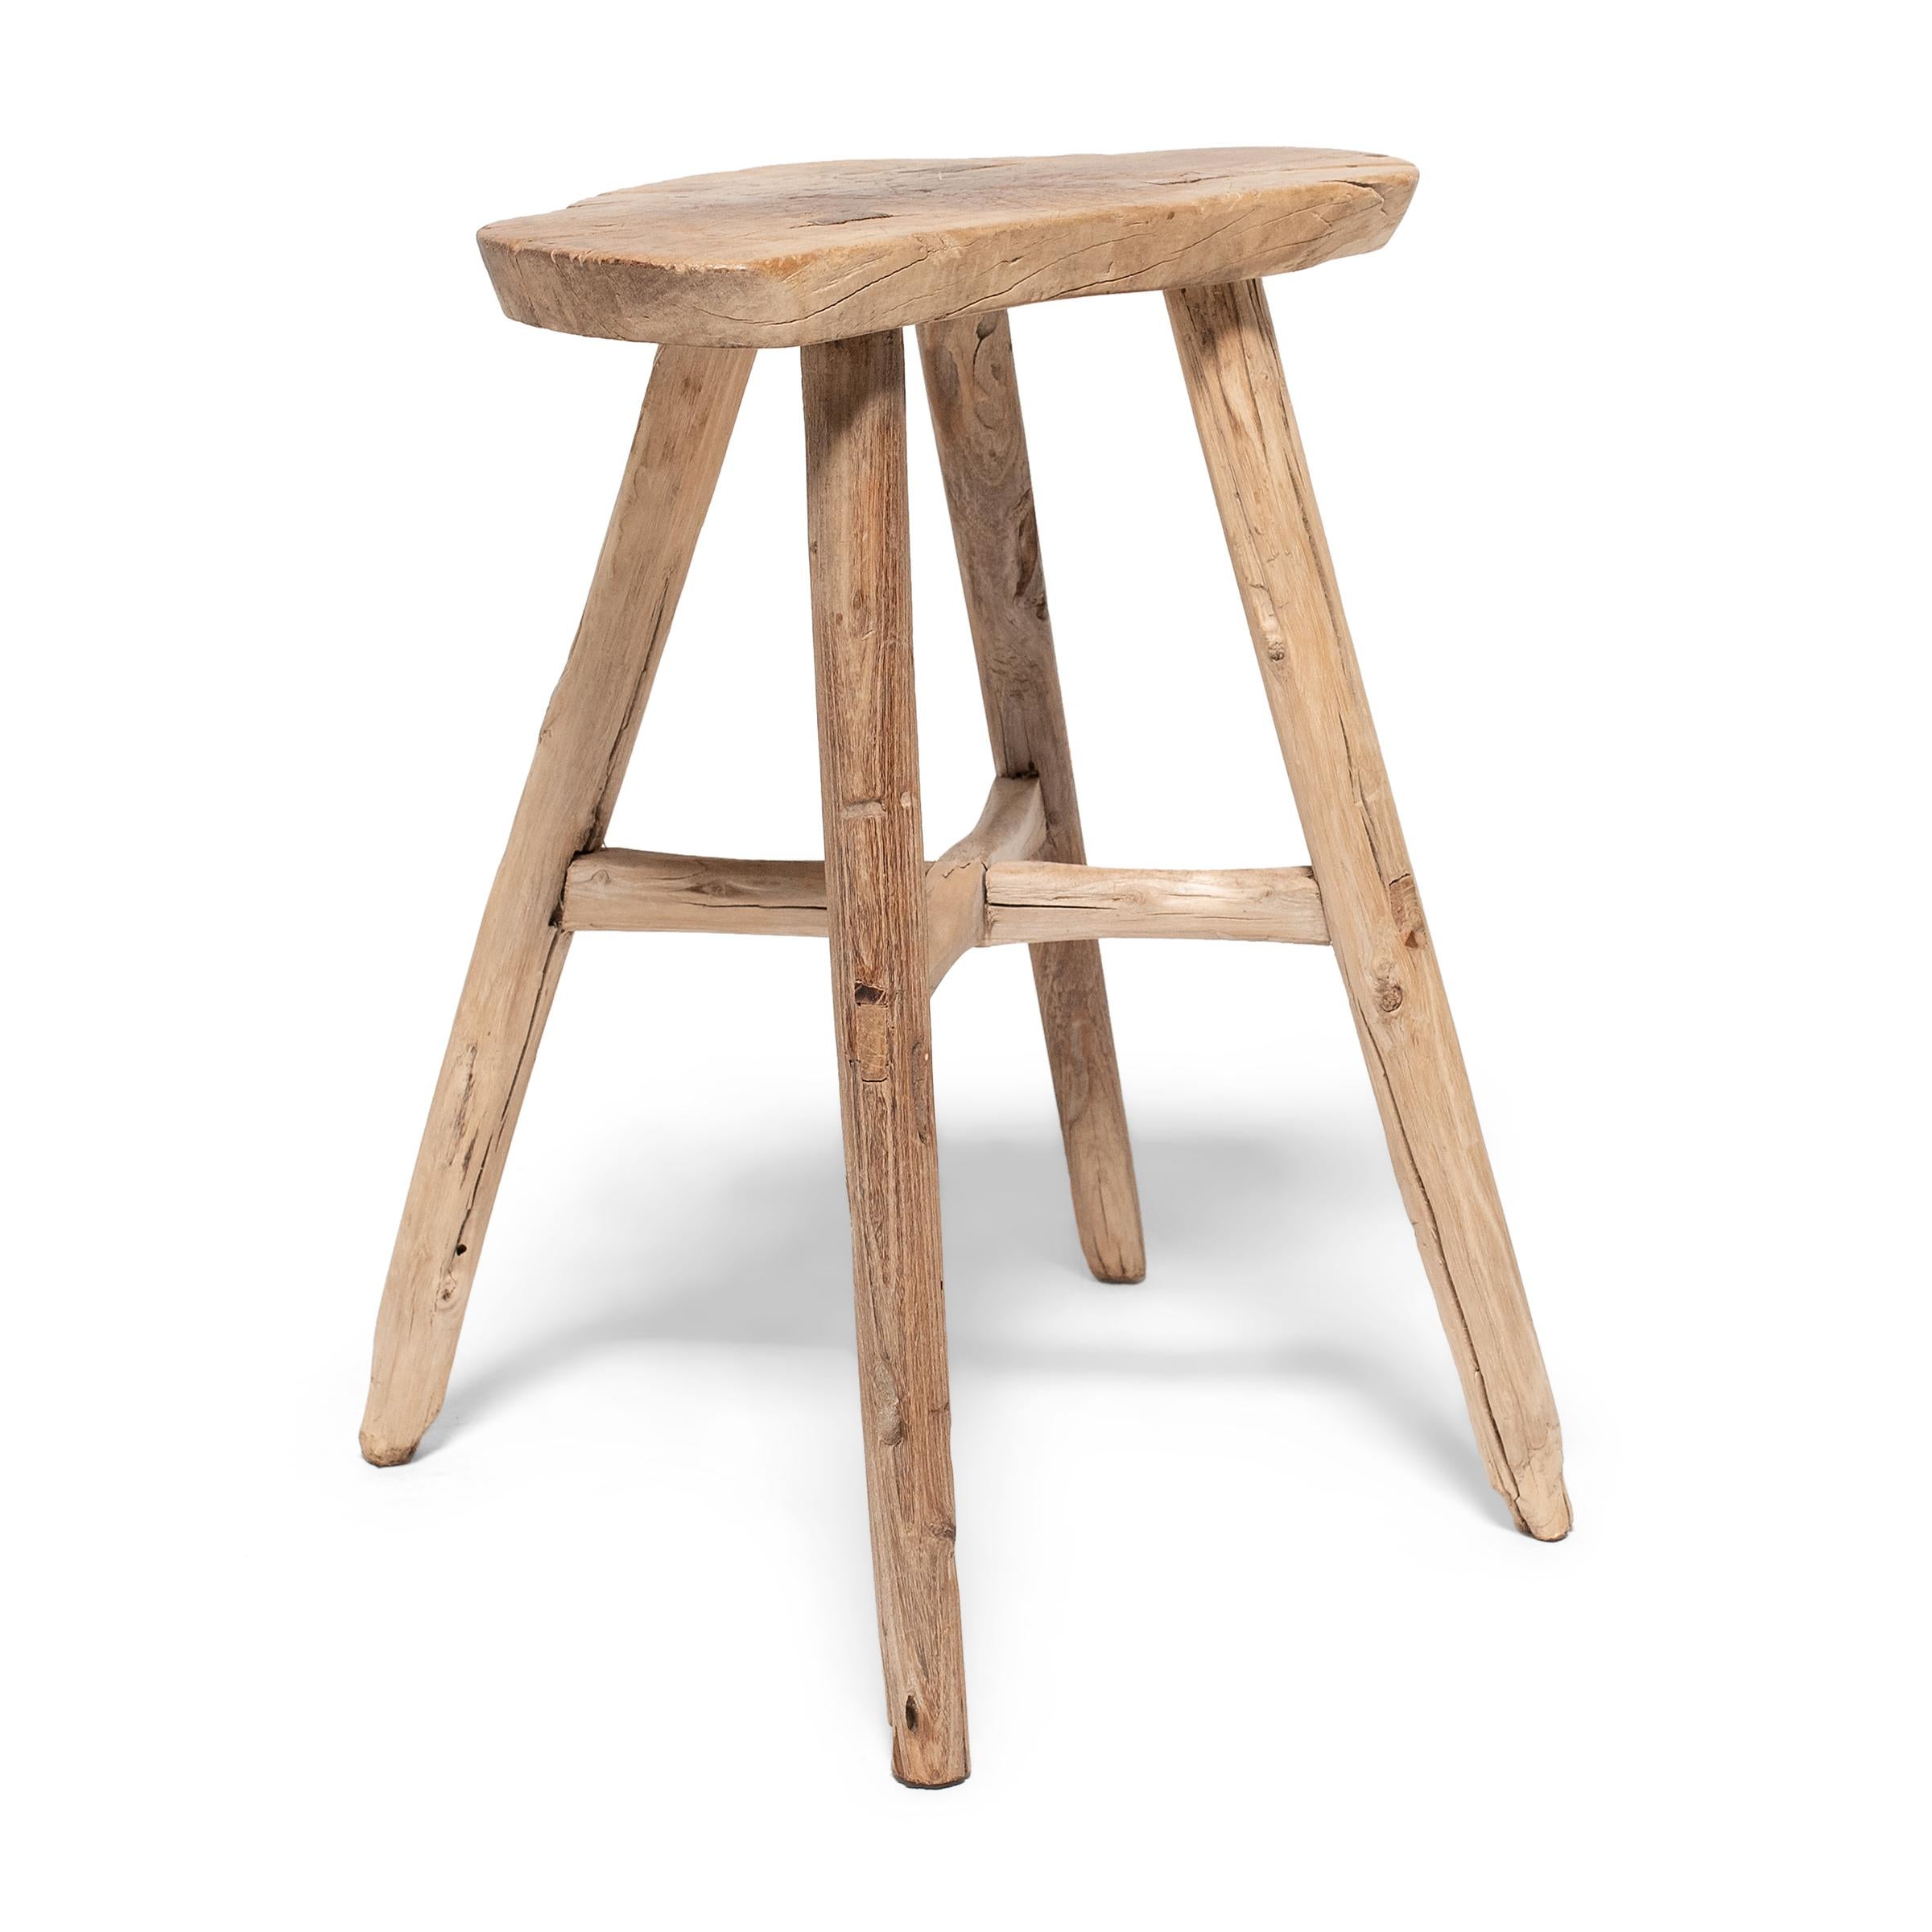 Crafted of Chinese northern elm (yumu) using mortise-and-tenon joinery, this everyday stool from Shandong province charms with timeless rustic appeal. Four thin legs support linked by crossed stretchers support a trefoil seat shaped to resemble a